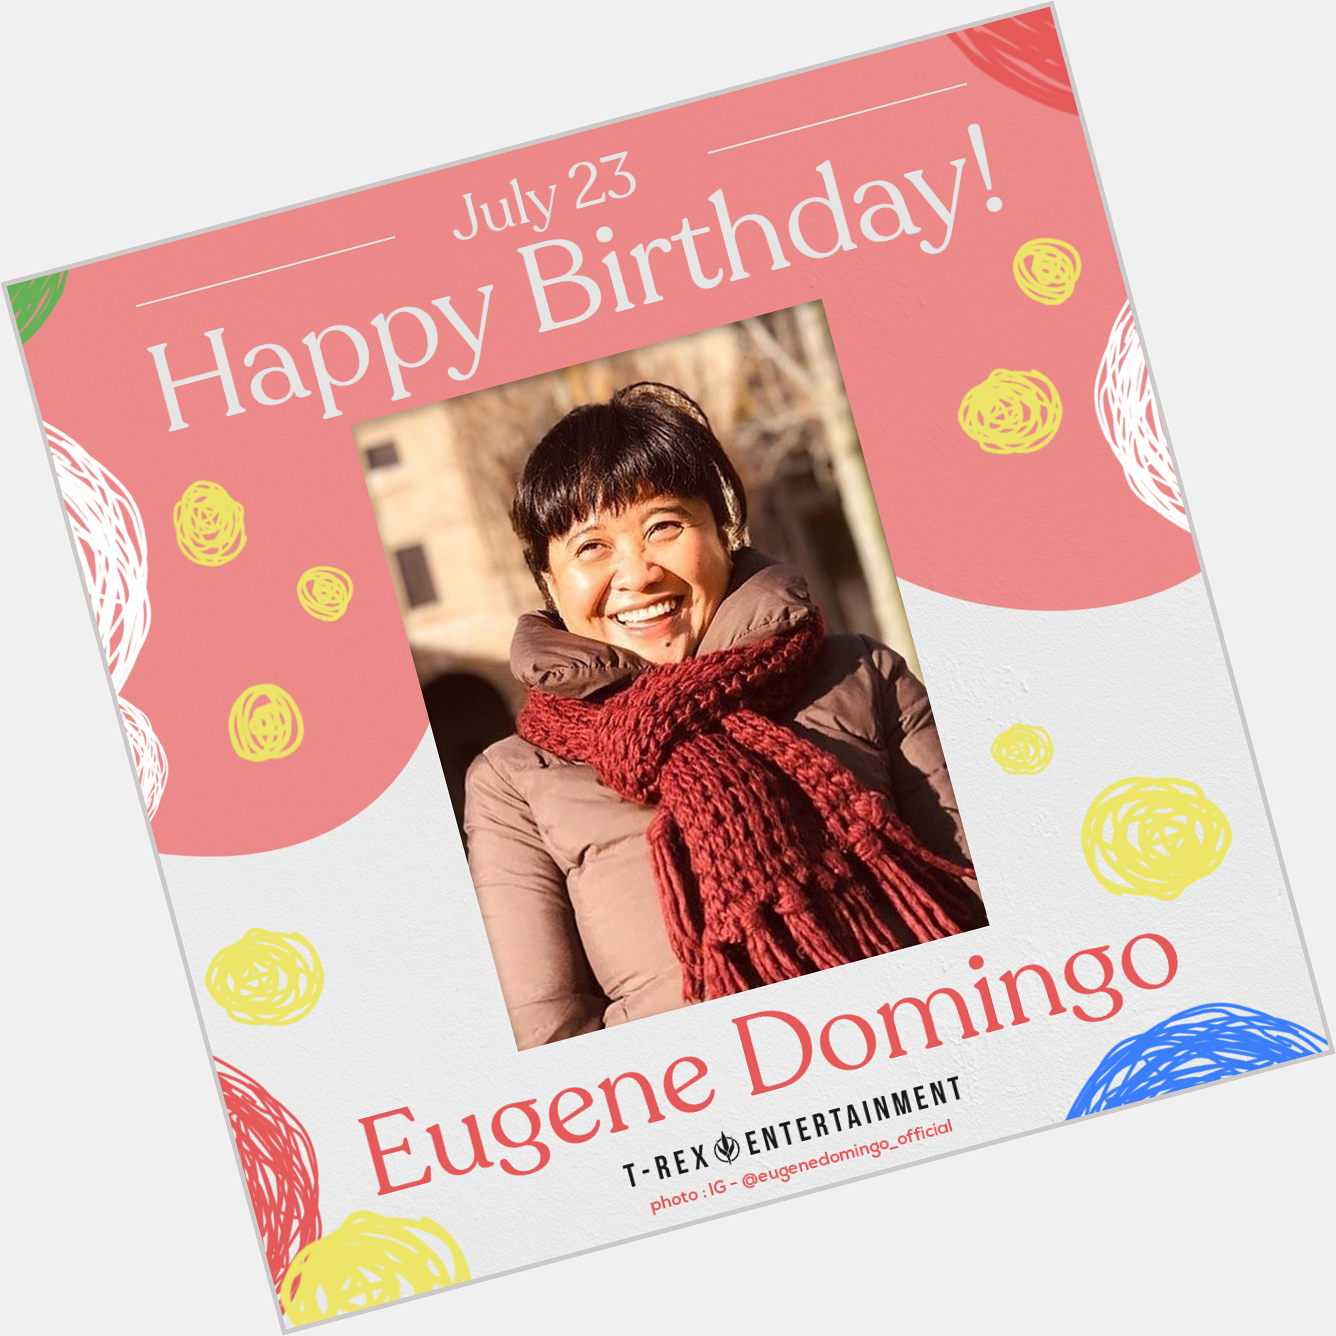 Happy birthday to you, Eugene Domingo!

Have a good one today! 